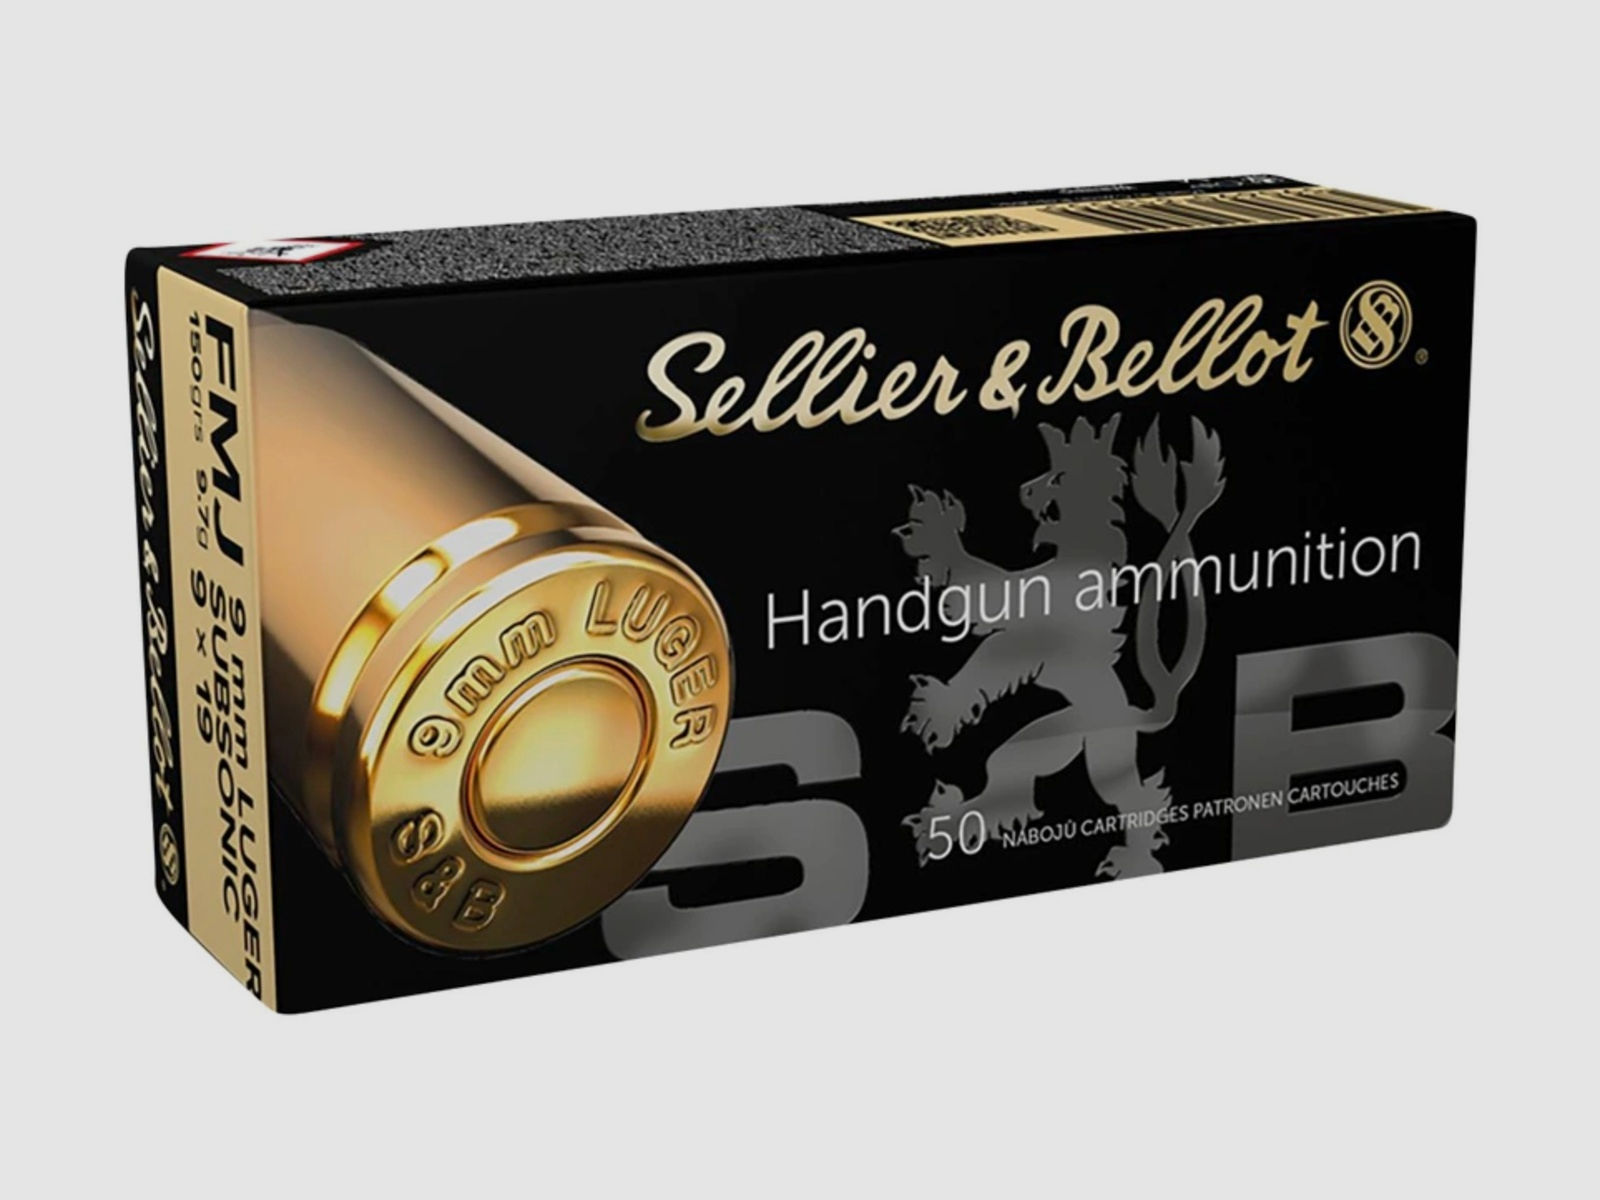 Sellier & Bellot 9mm Luger Vollmantel Subsonic 9,7g 150grs.